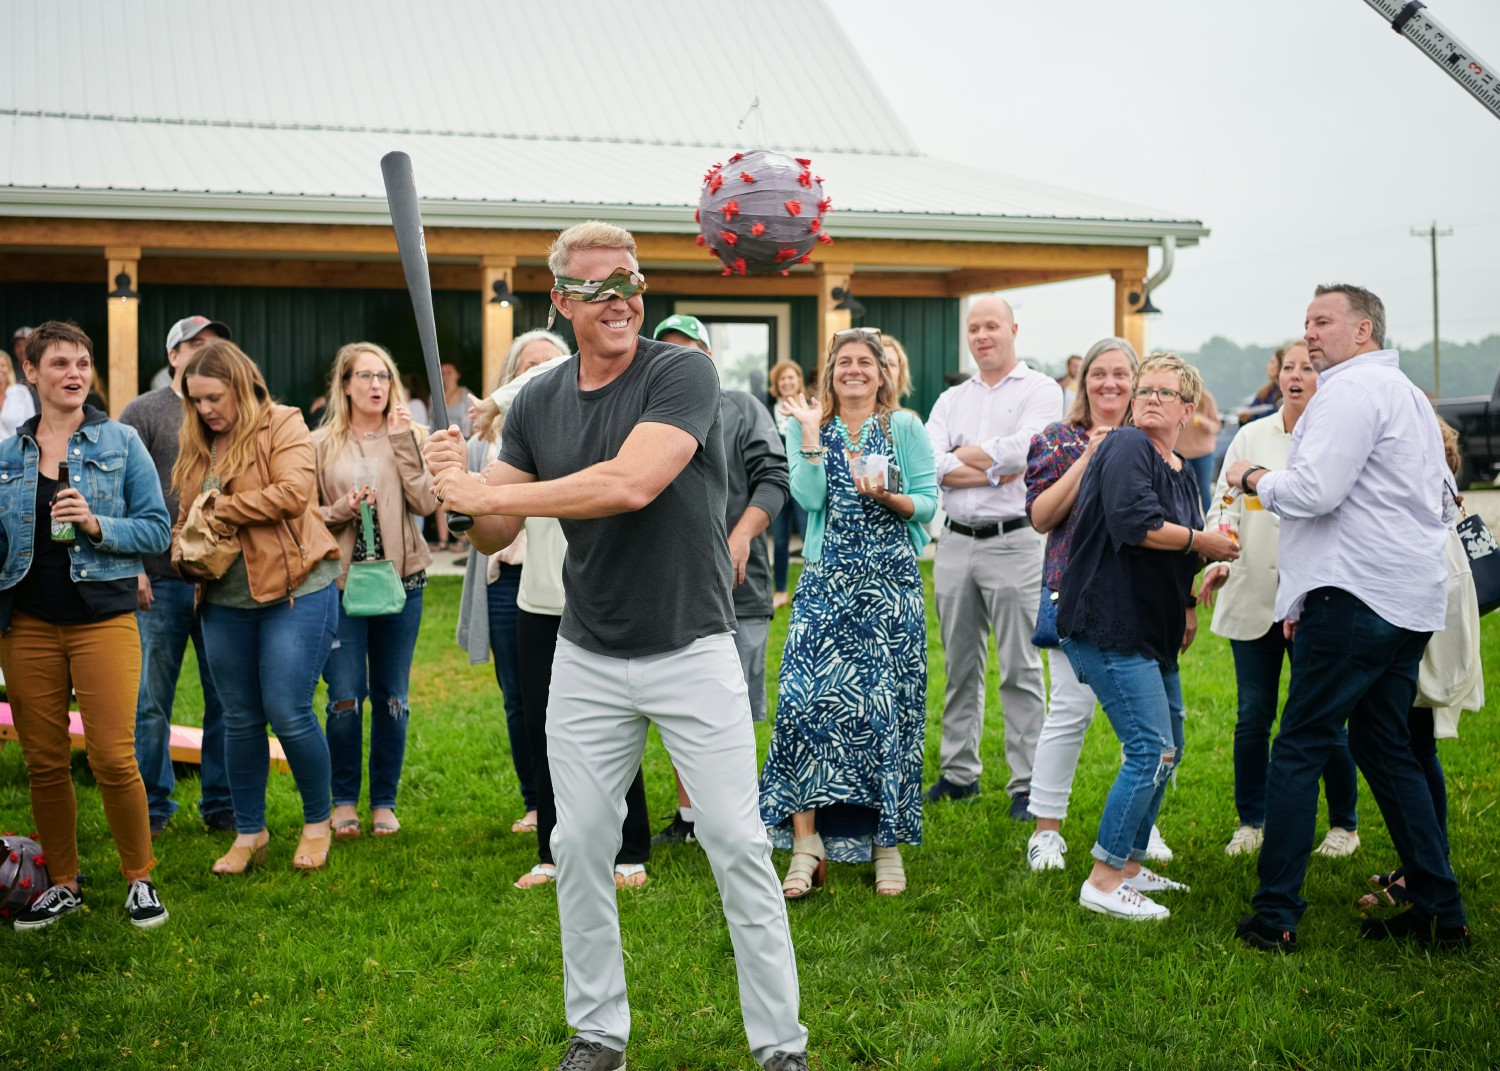 Our CEO at an employee event playing one of the games.